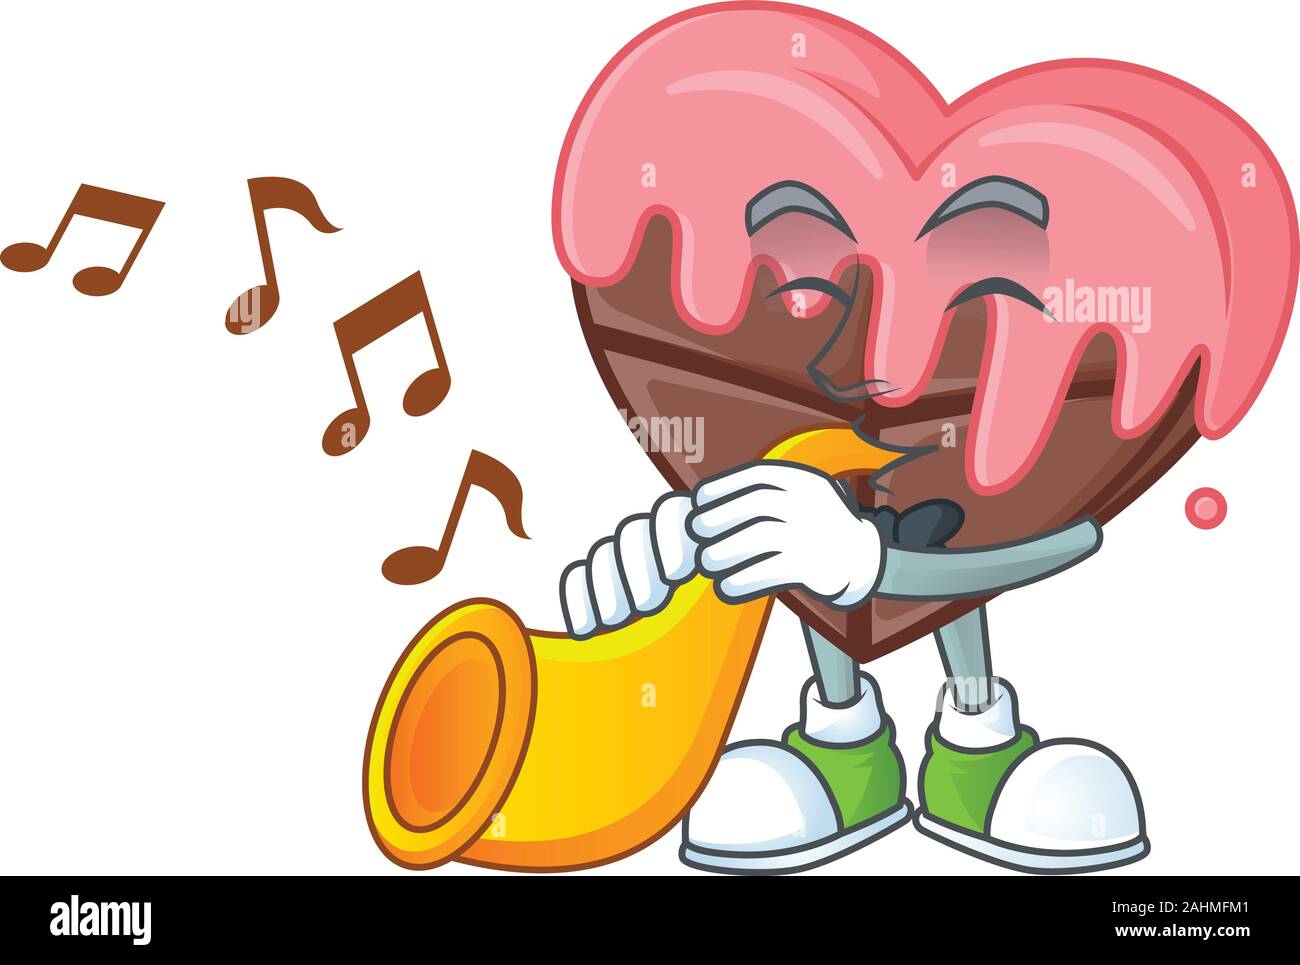 Cheerful love chocolate with pink cartoon character performance with trumpet Stock Vector